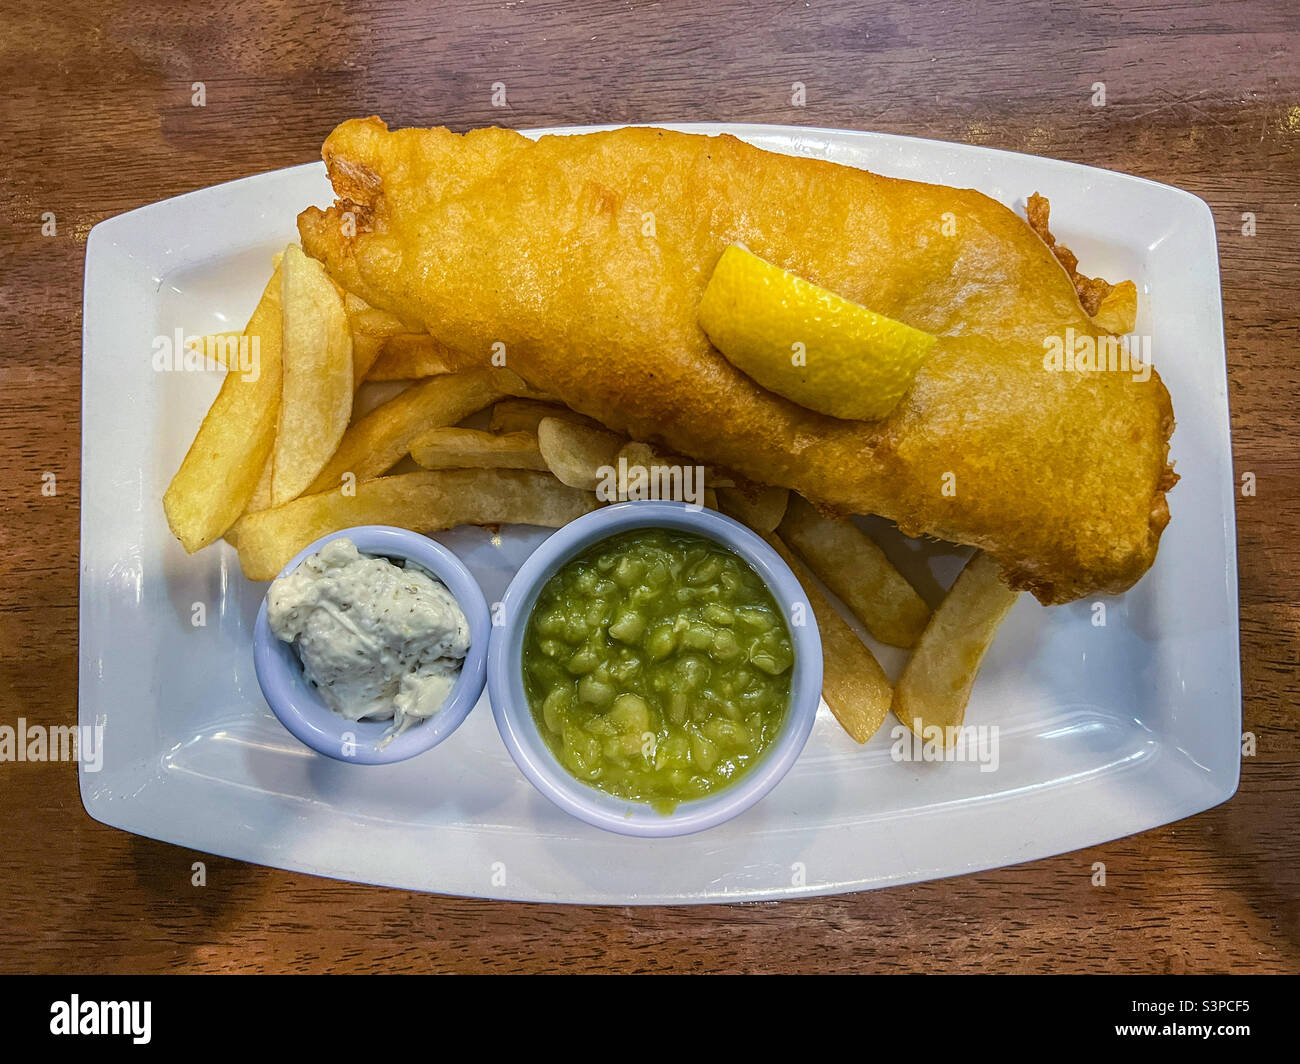 Fish and chips and mushy peas and tartare sauce Stock Photo